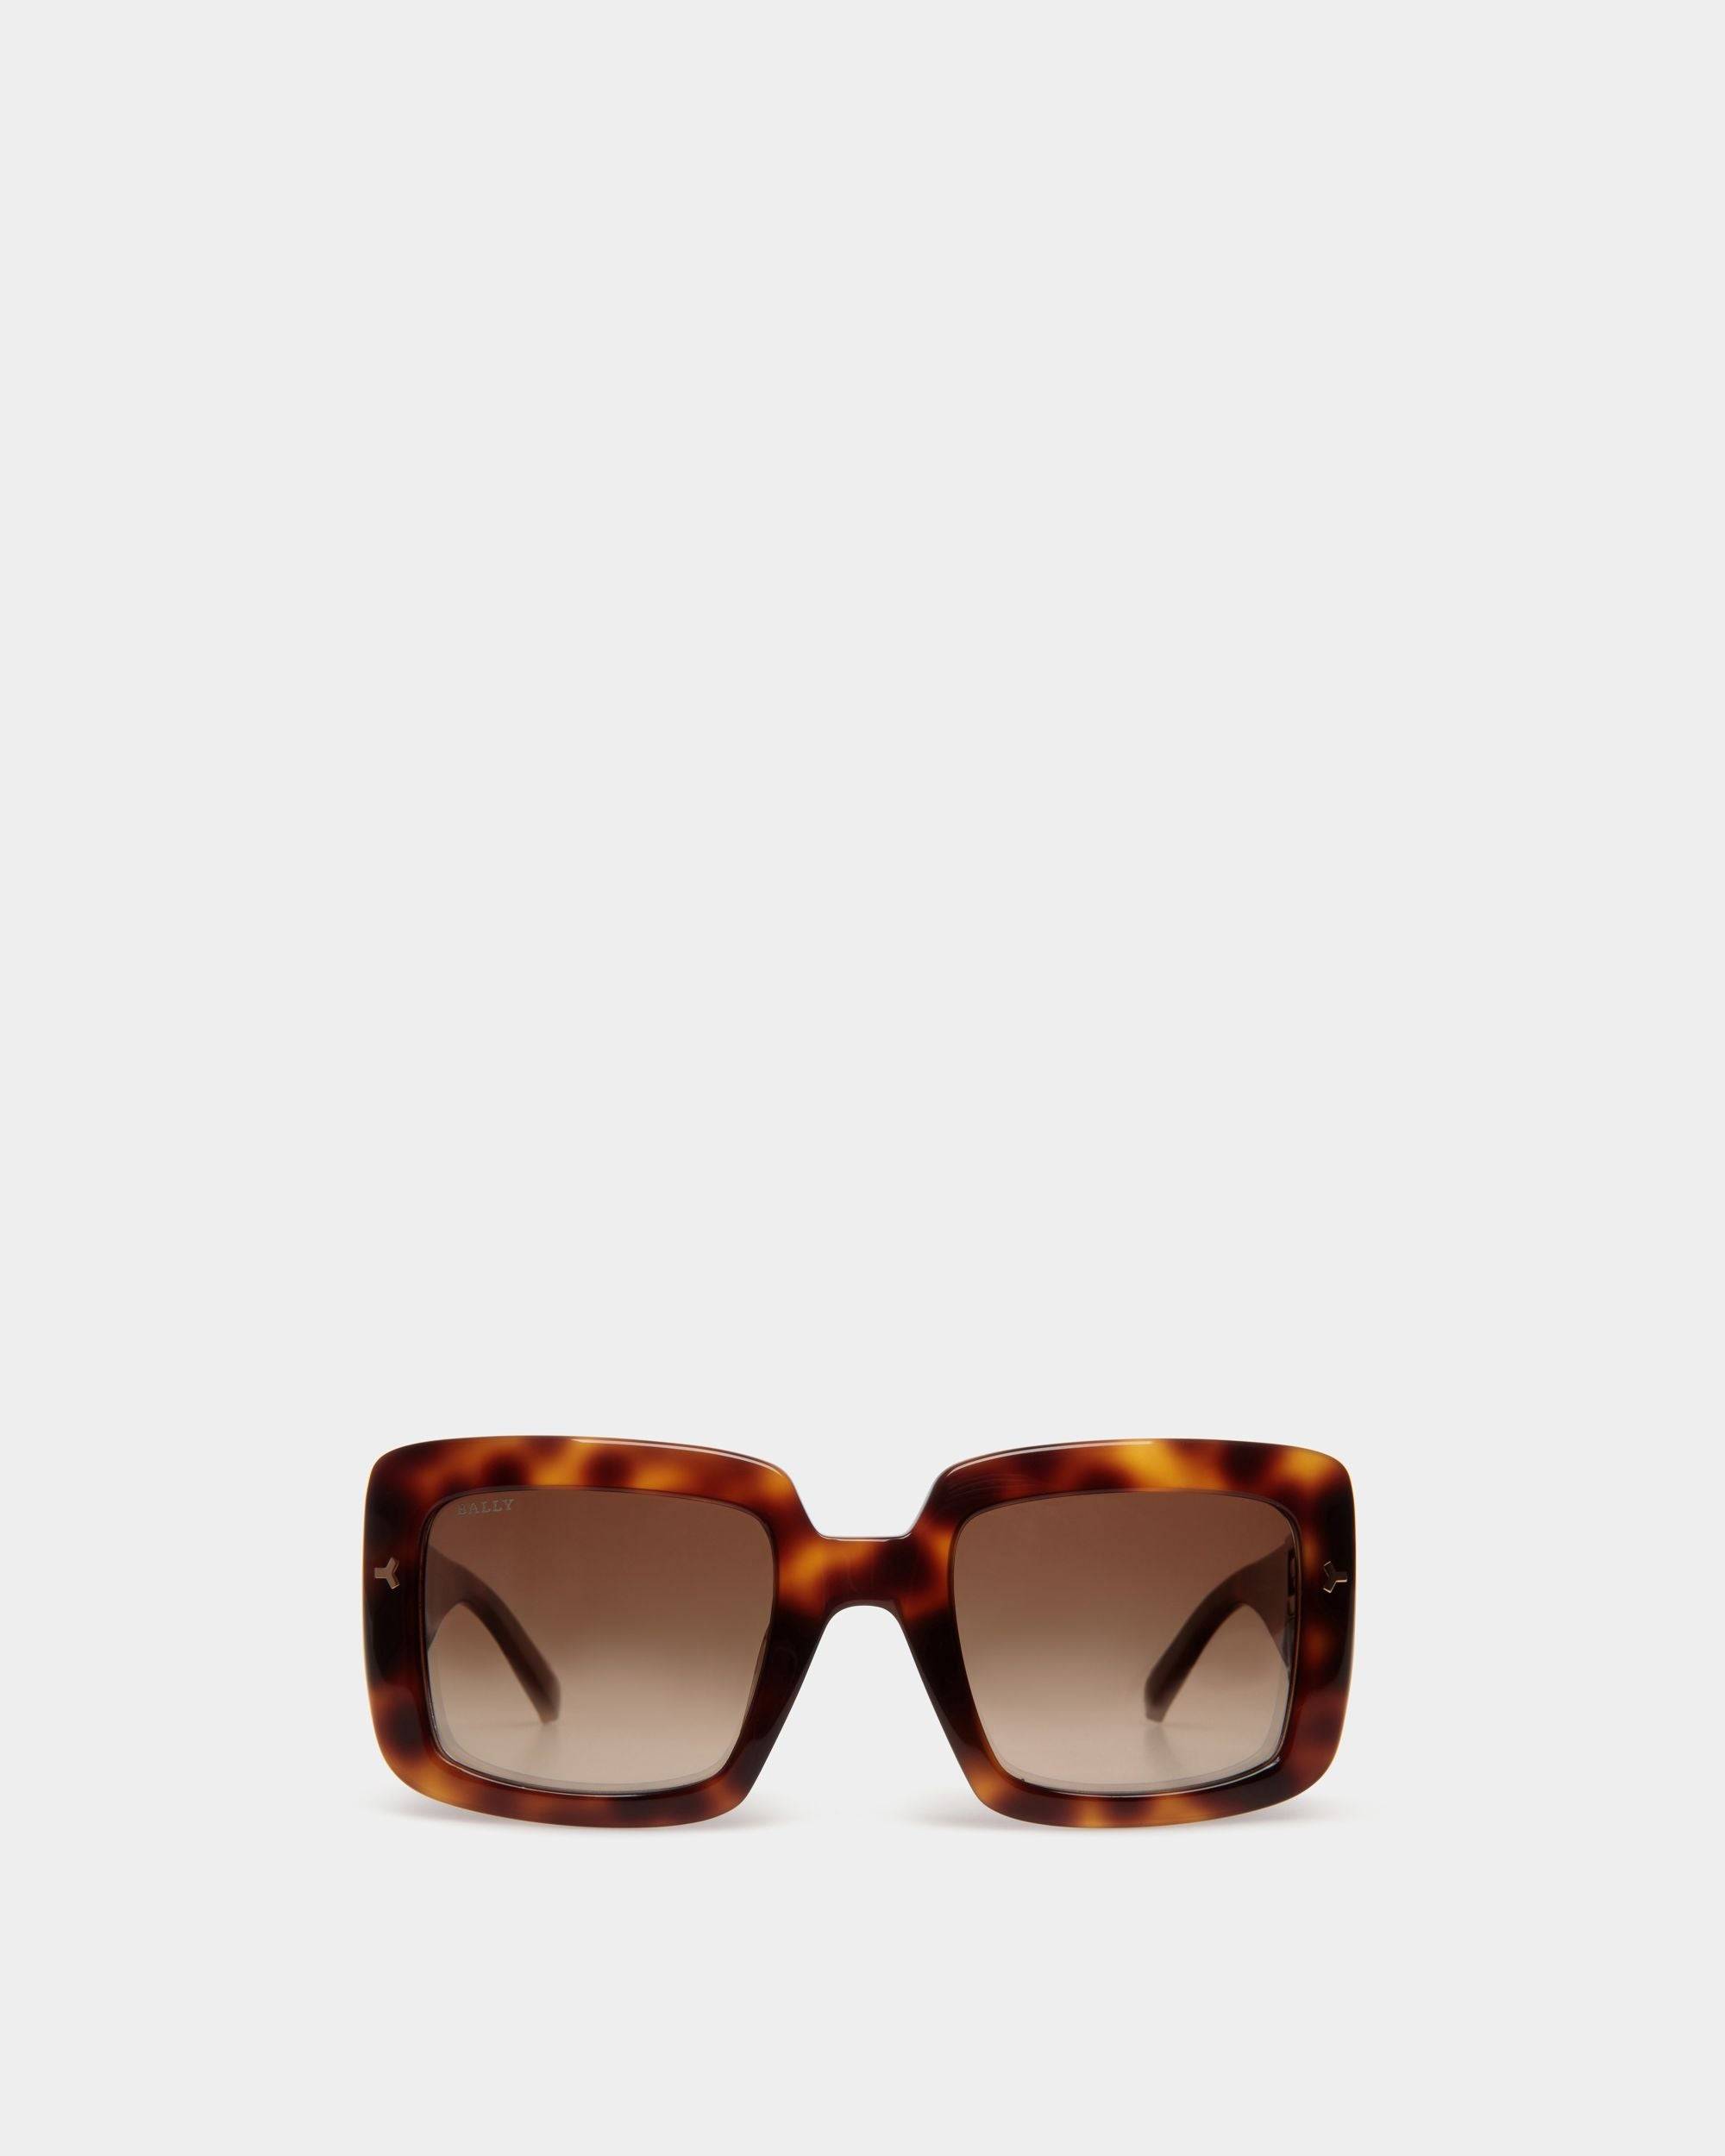 Rose Gold Women Sunglasses, Butterfly Style | Bally | Sunglasses | Miinto